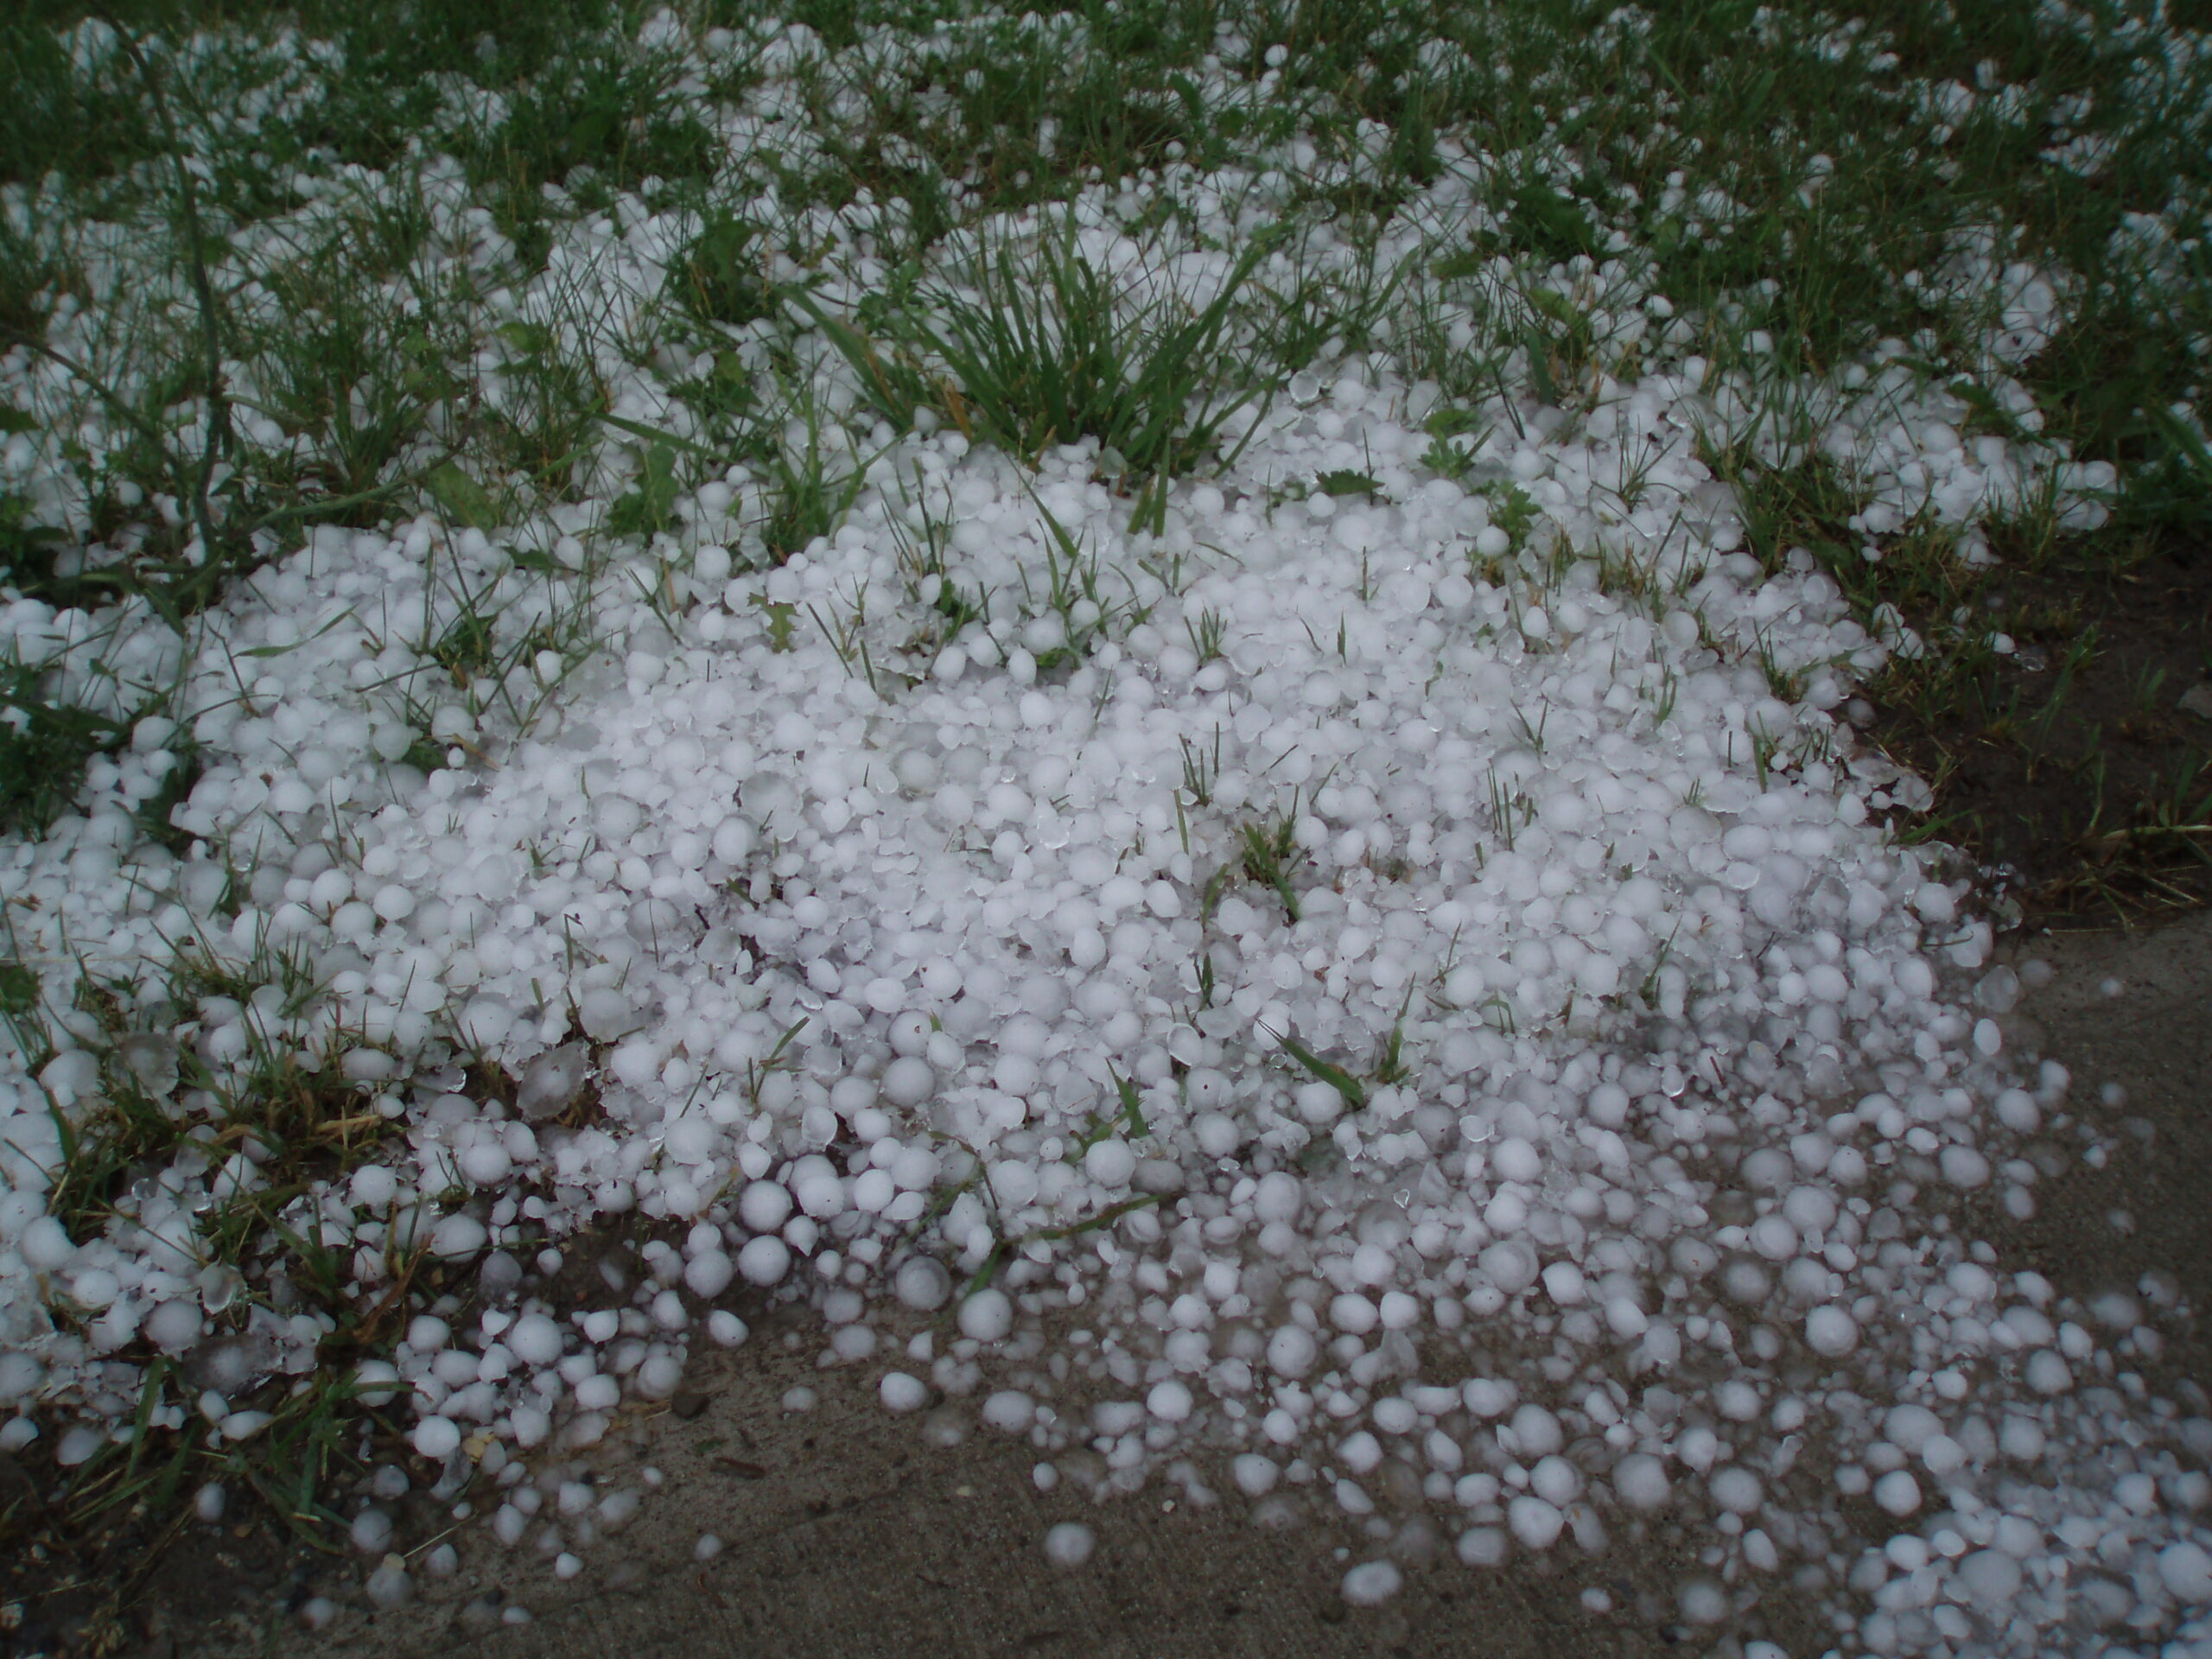 Is Your Roof Ready For Hail Season?